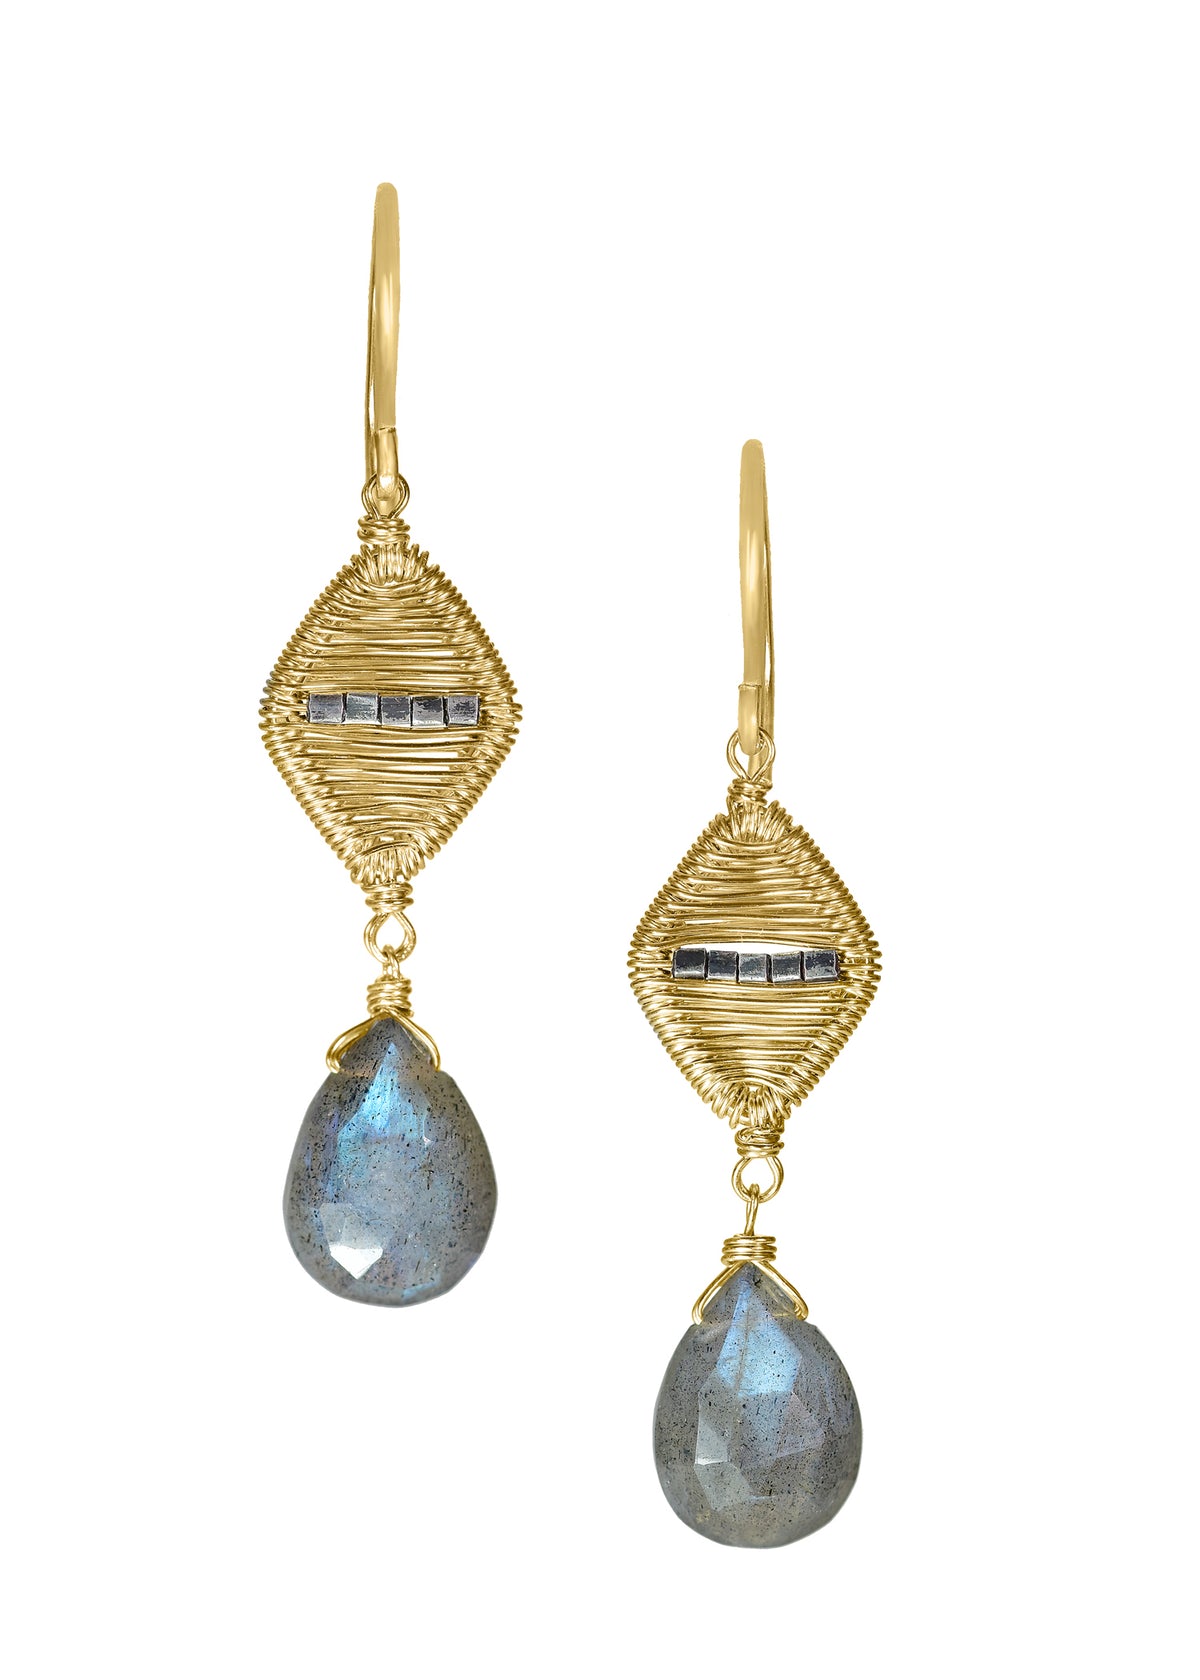 Labradorite 14k gold fill Sterling silver Mixed metal Earrings measure 1-1/2&quot; in length (including the ear wires) and 3/8&quot; in width at the widest point Handmade in our Los Angeles studio